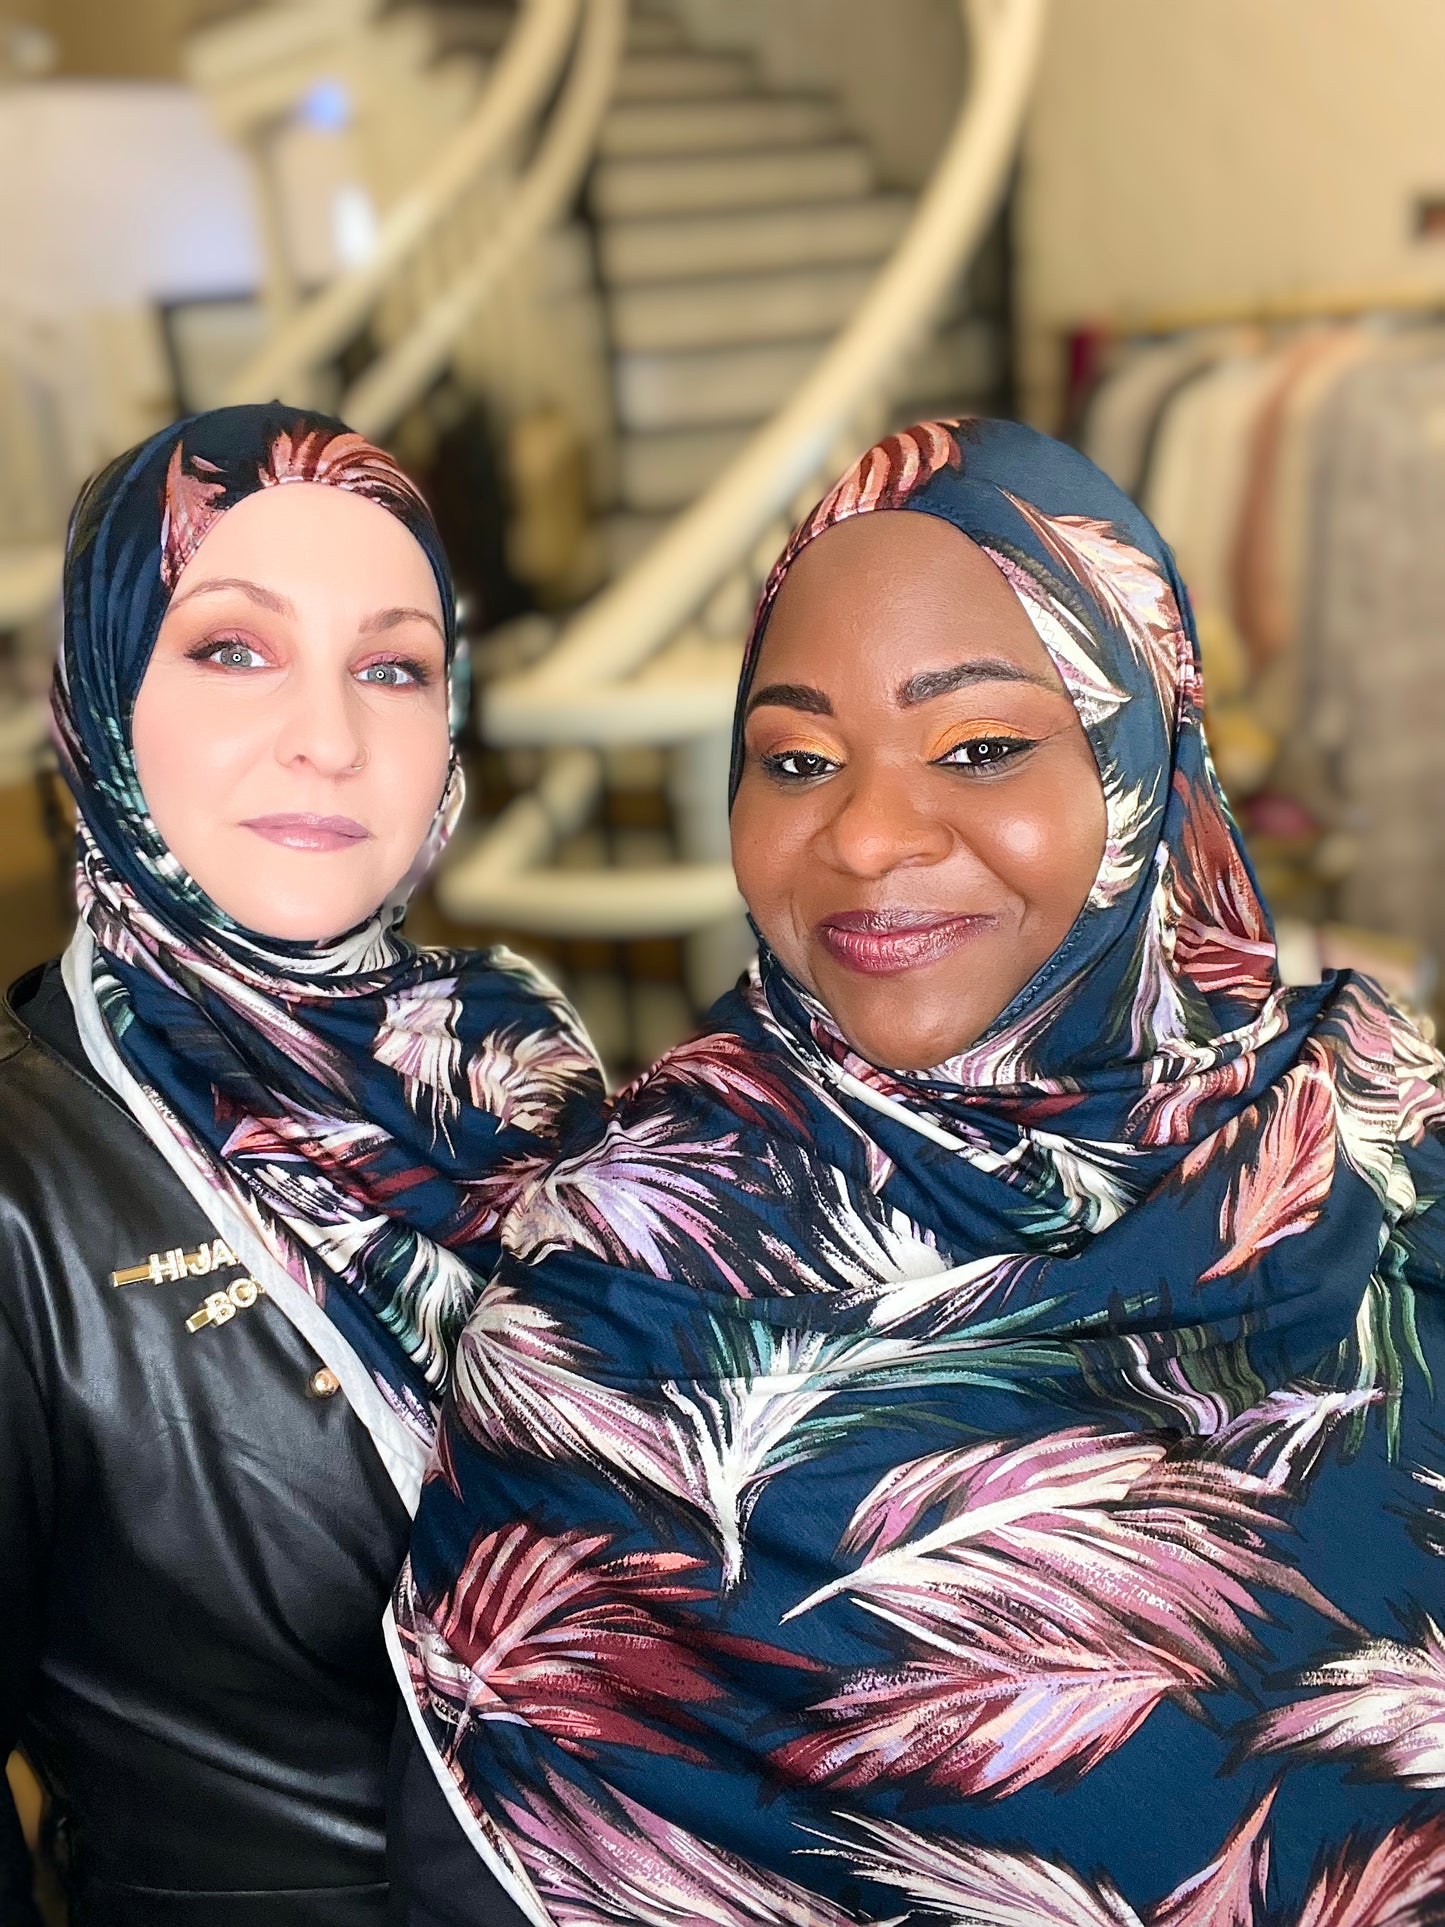 Printed Jersey Hijab: Fair Weather Friends